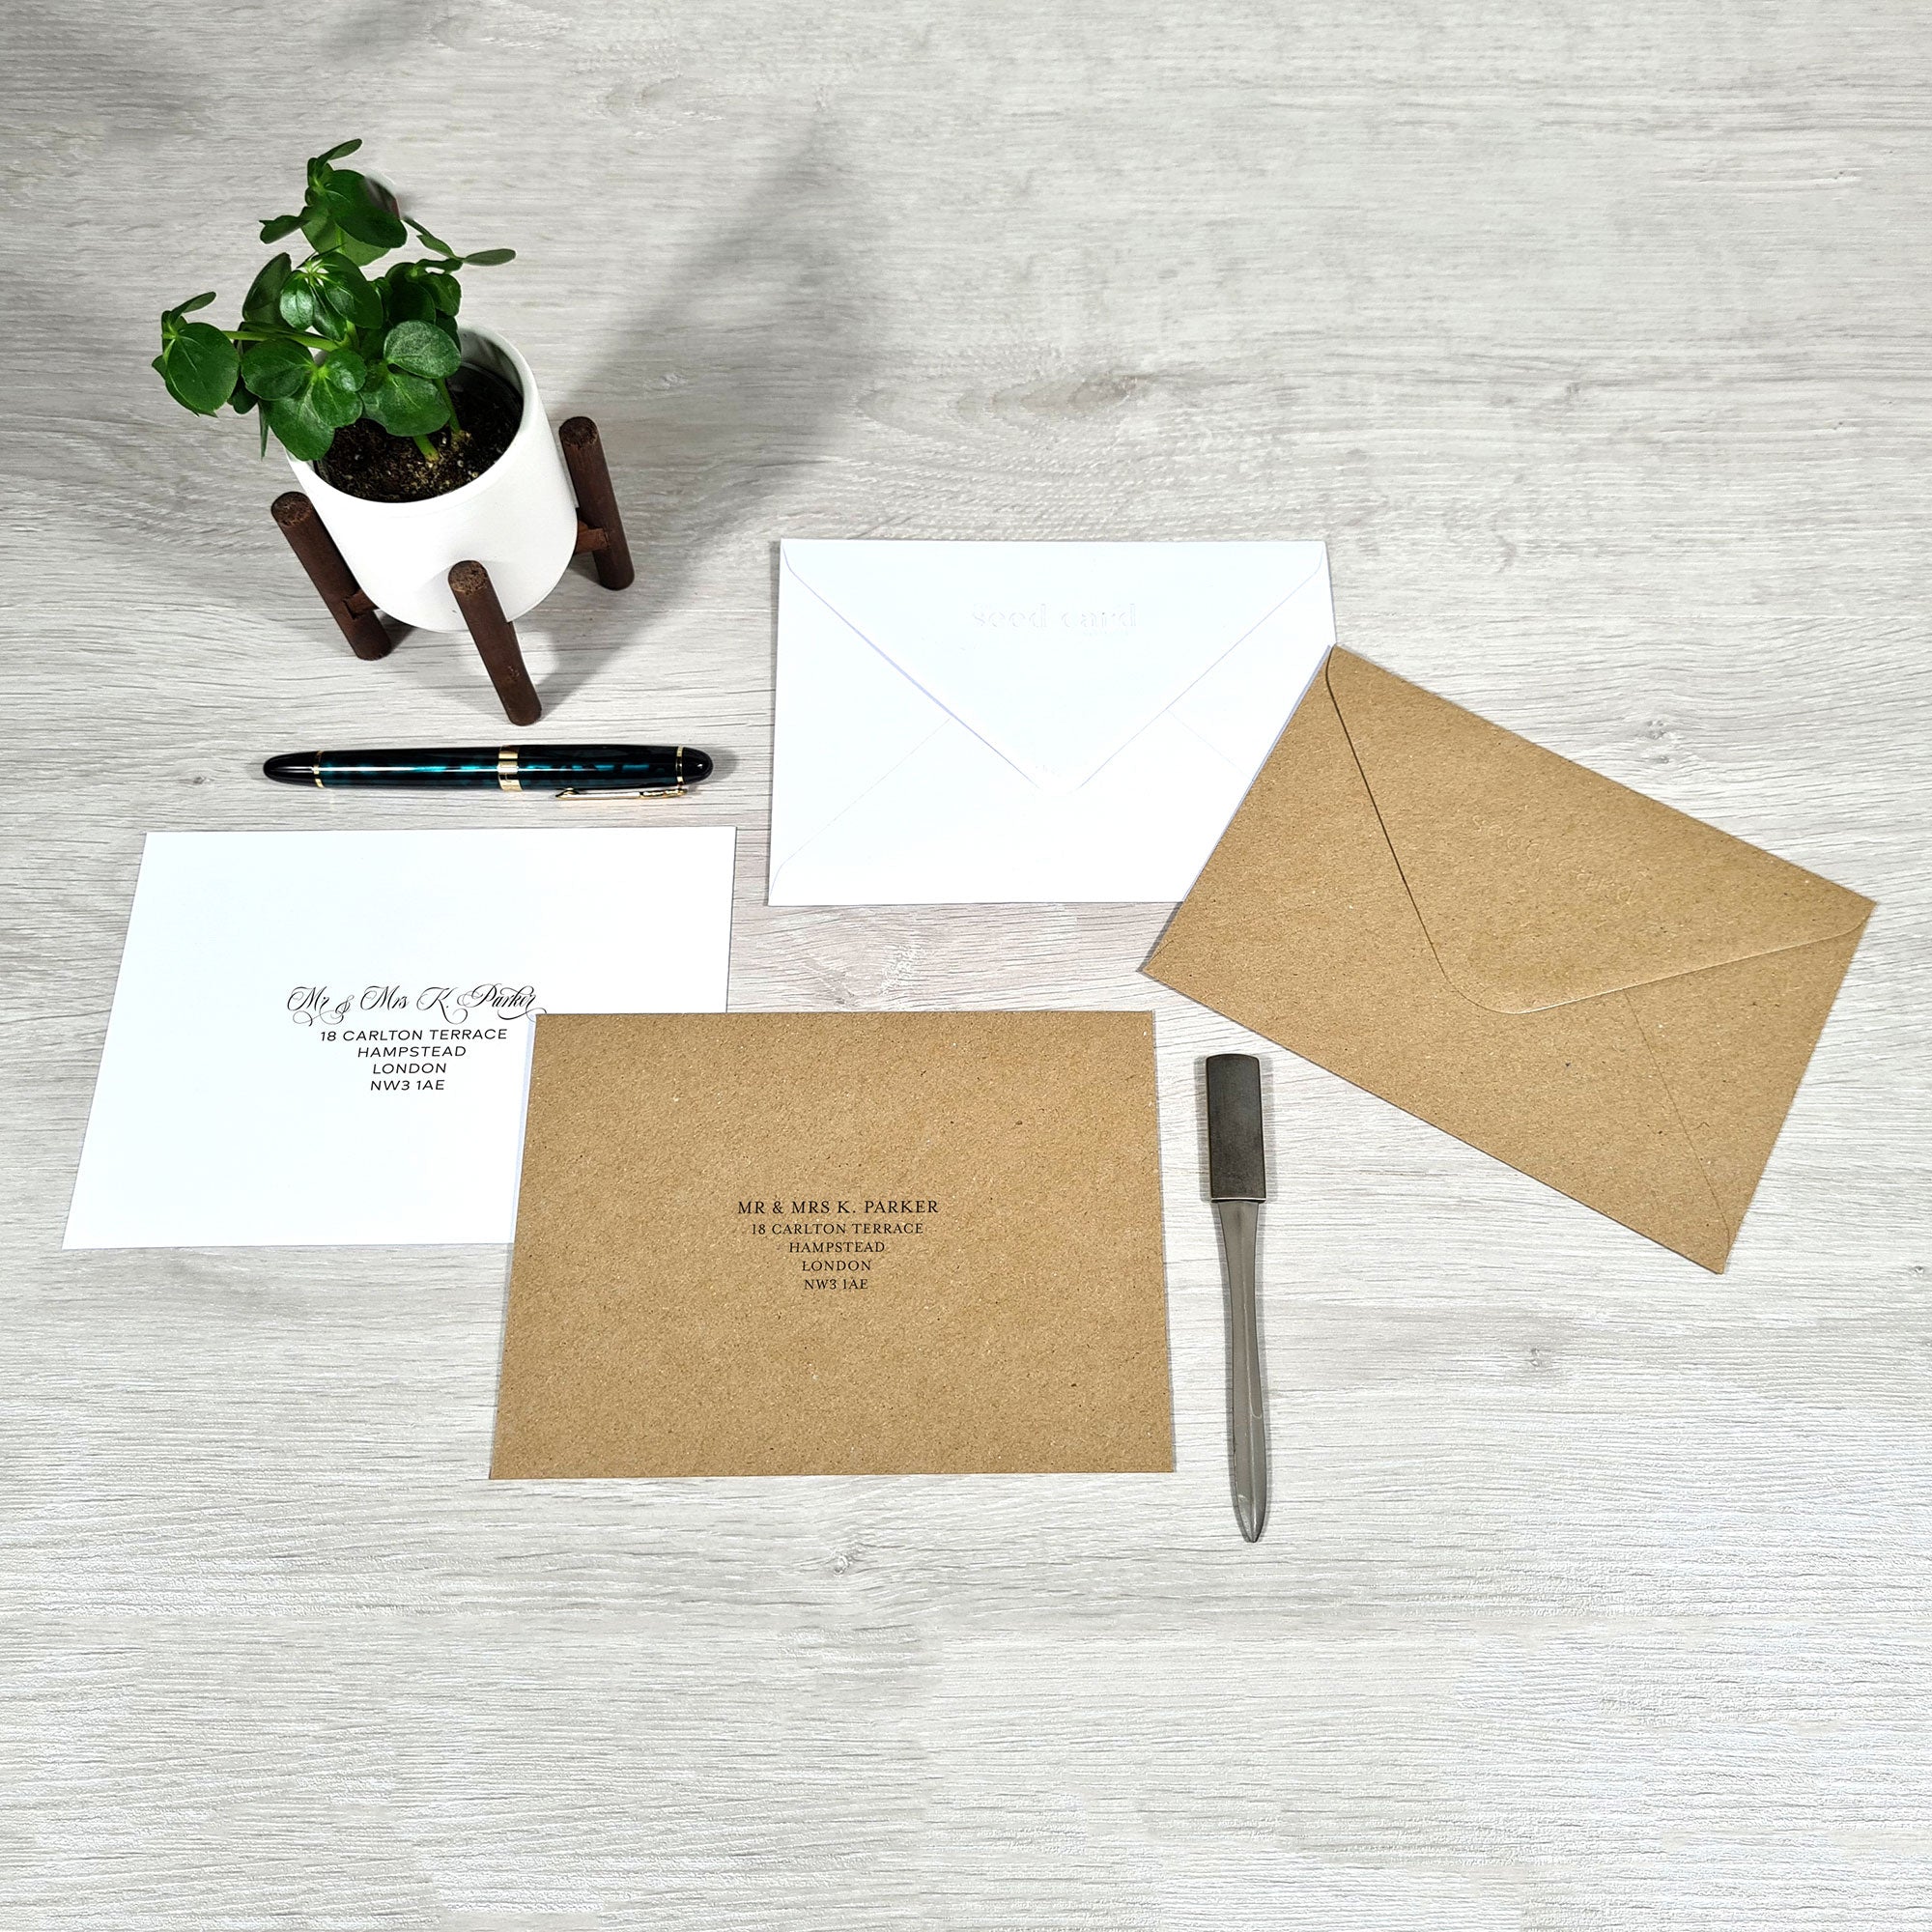 Shop online Tradition - 100% biodegradable seed-embedded cards Shop -The Seed Card Company